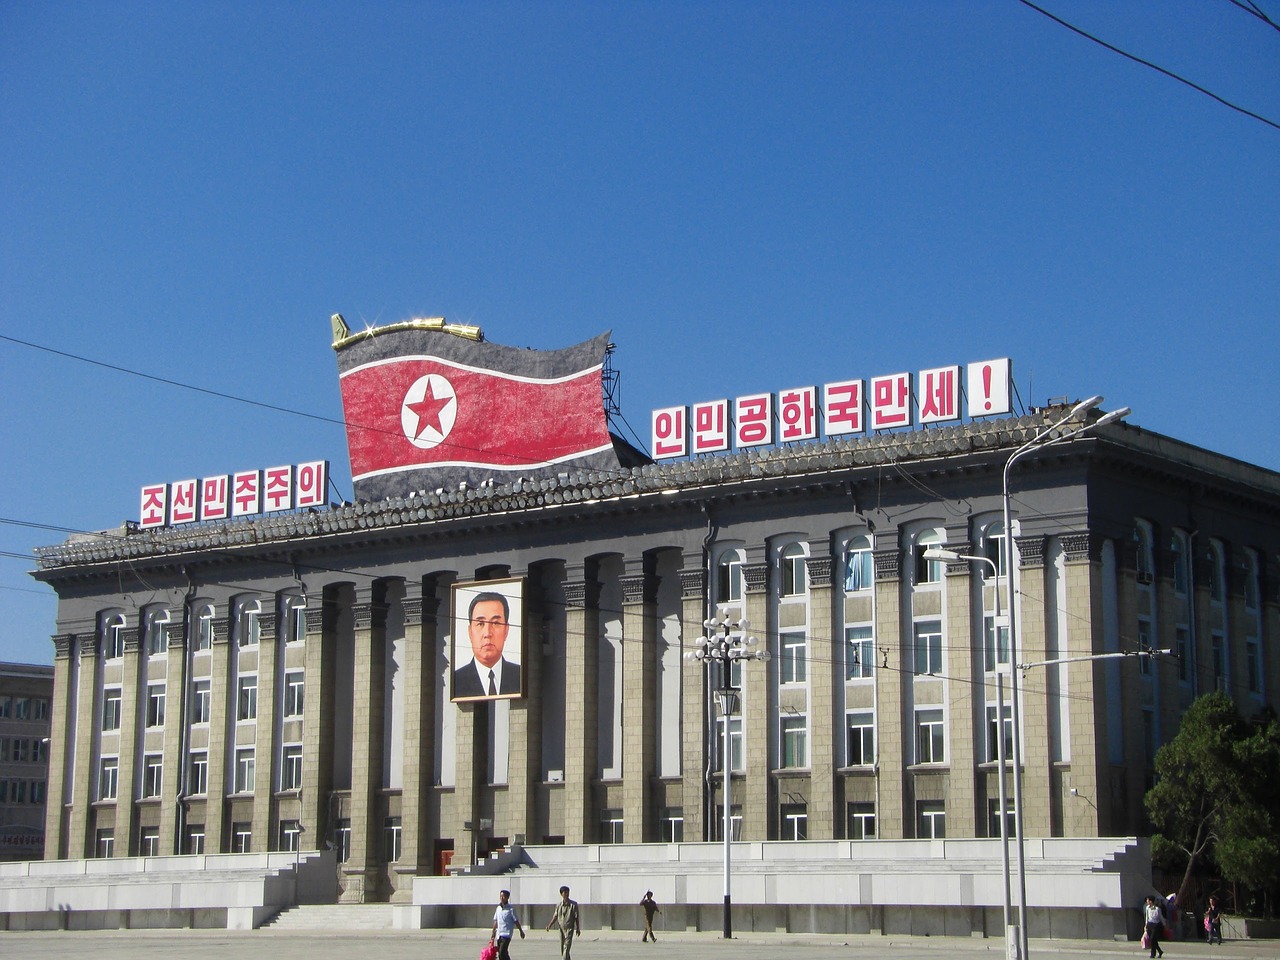 North Korea recognizes Donetsk and Luhansk regions as independent